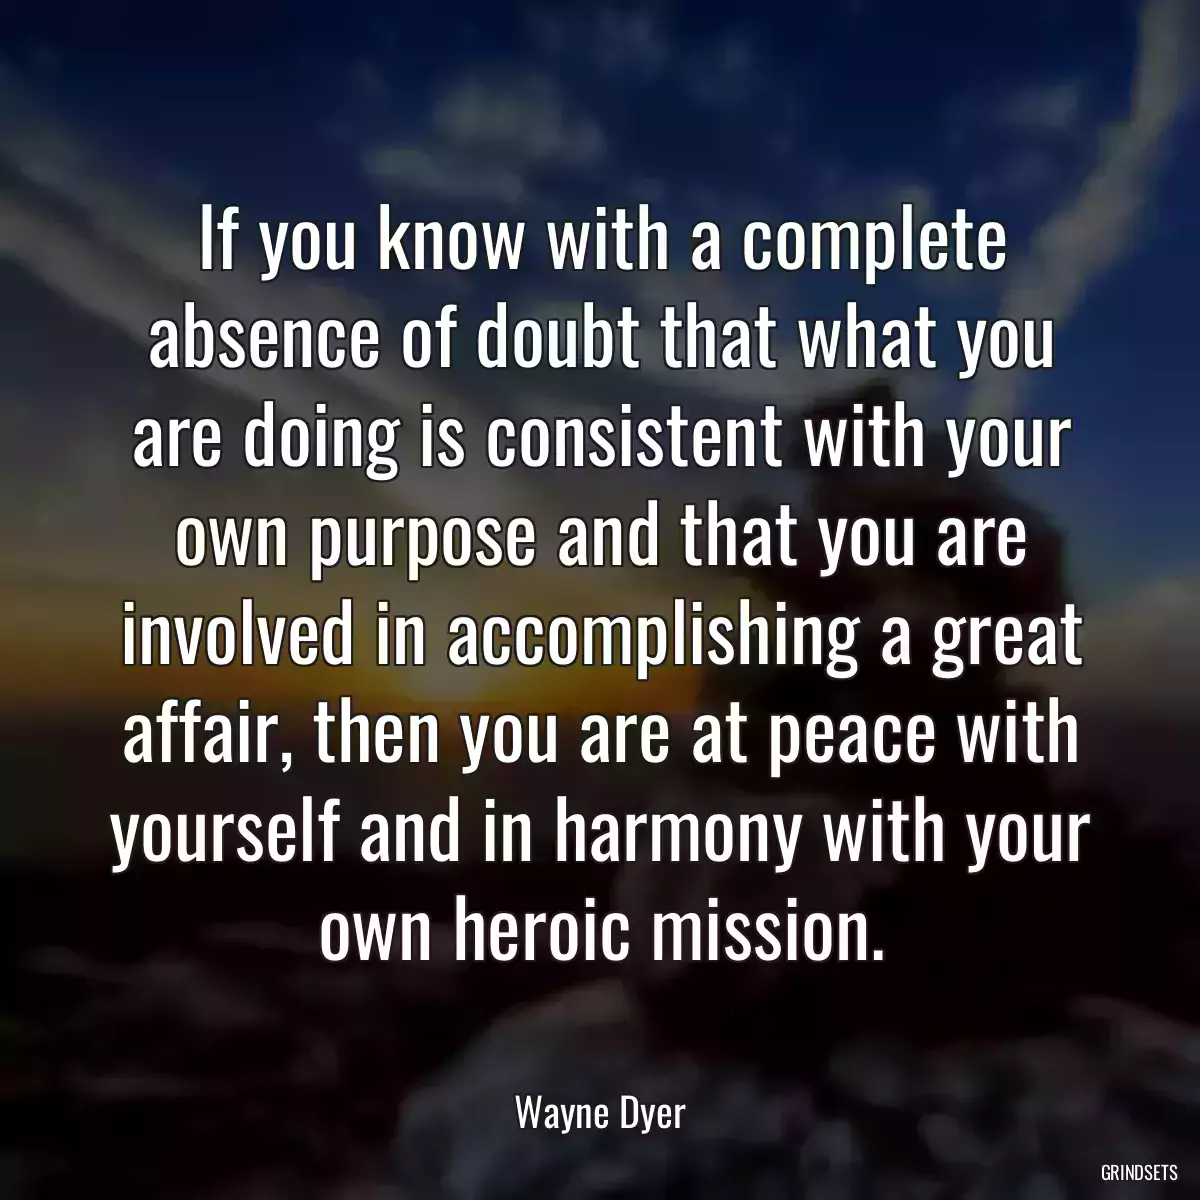 If you know with a complete absence of doubt that what you are doing is consistent with your own purpose and that you are involved in accomplishing a great affair, then you are at peace with yourself and in harmony with your own heroic mission.